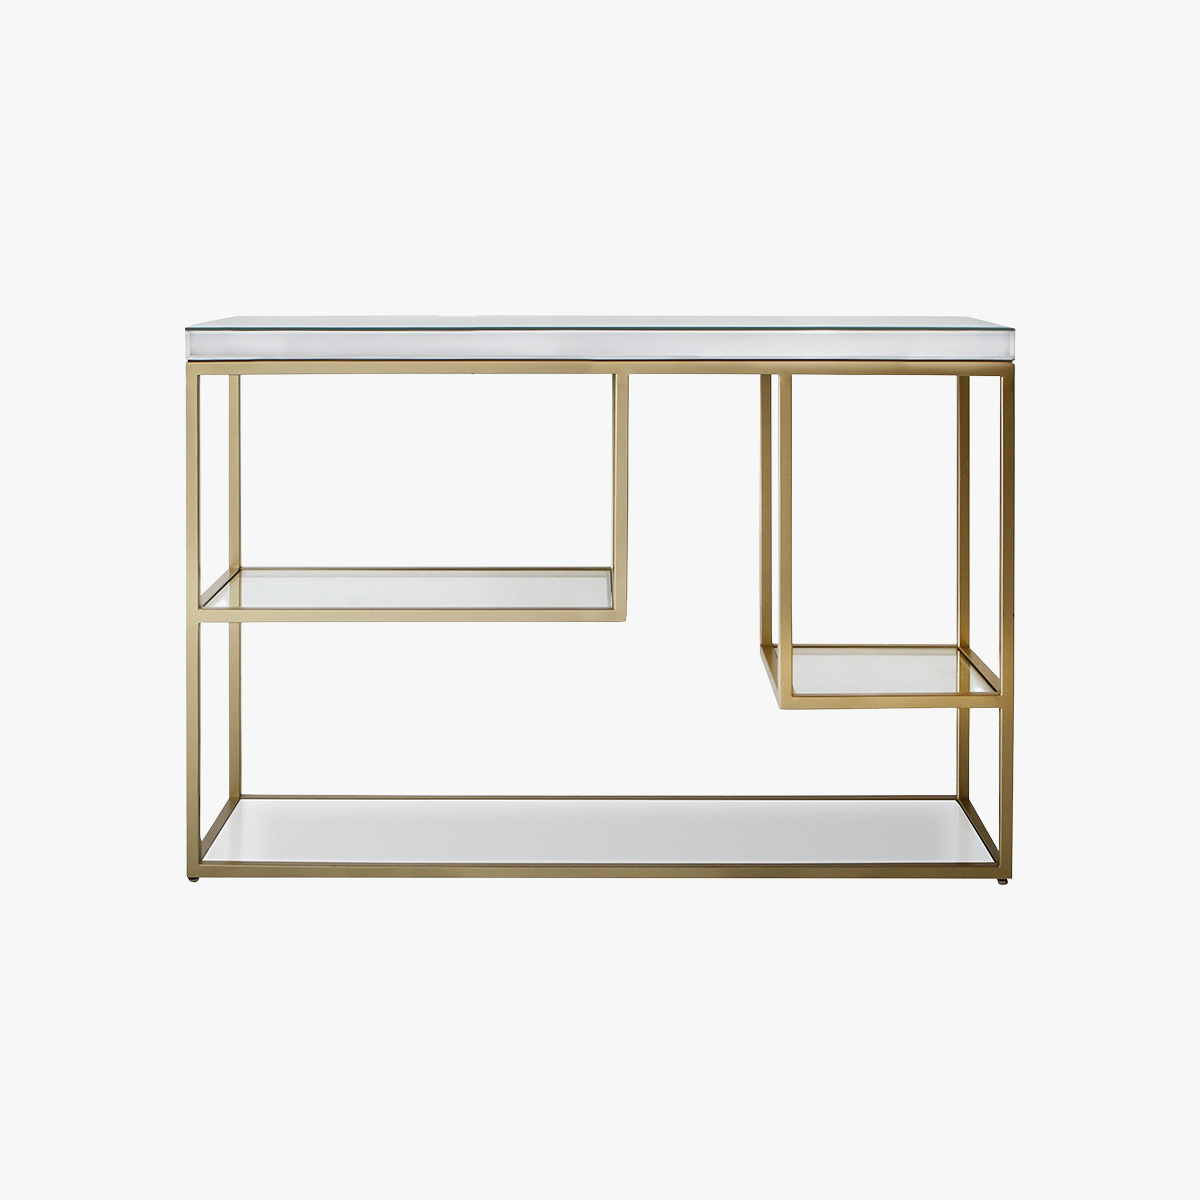 Damsay Console Table in Champagne